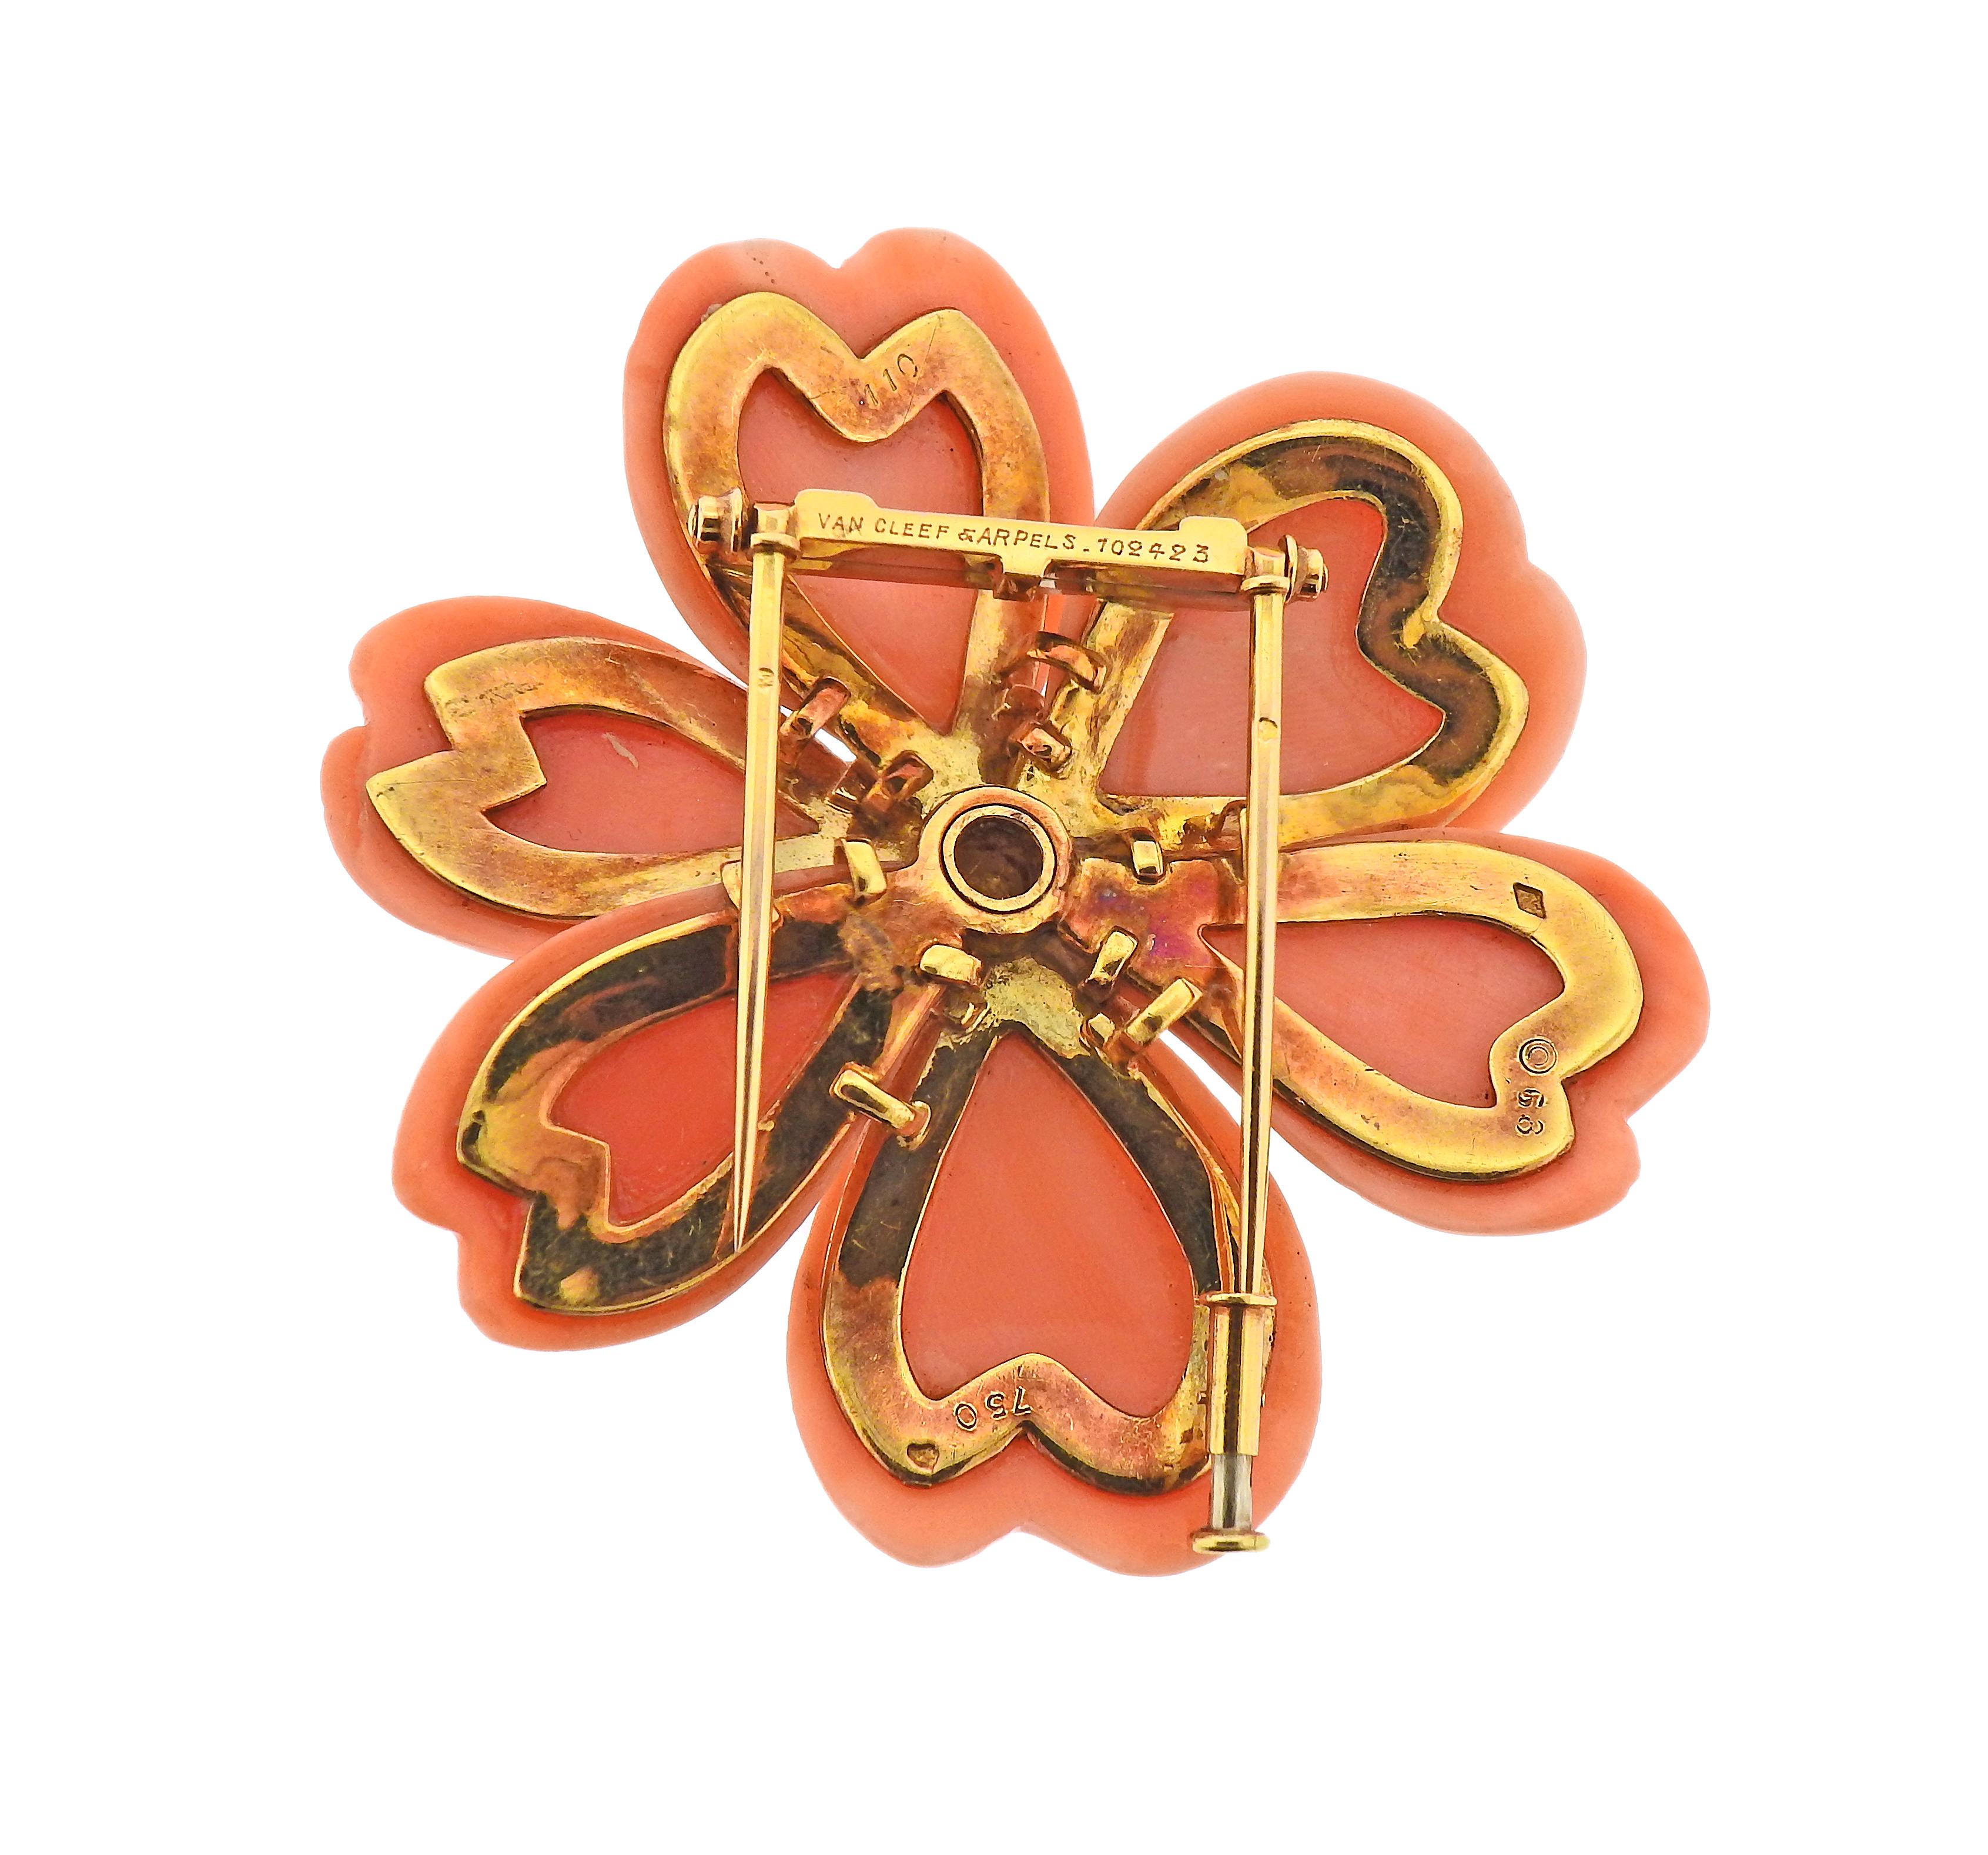 Large Van Cleef & Arpels 18k gold flower brooch, made in France. Featuring coral petals and approx. 1.70cts in diamonds. Brooch measures 52mm x 52mm. Marked: 750, Van Cleef & Arpels, French marks, 53, 110. Weight - 33.3 grams. Comes in VCA box.